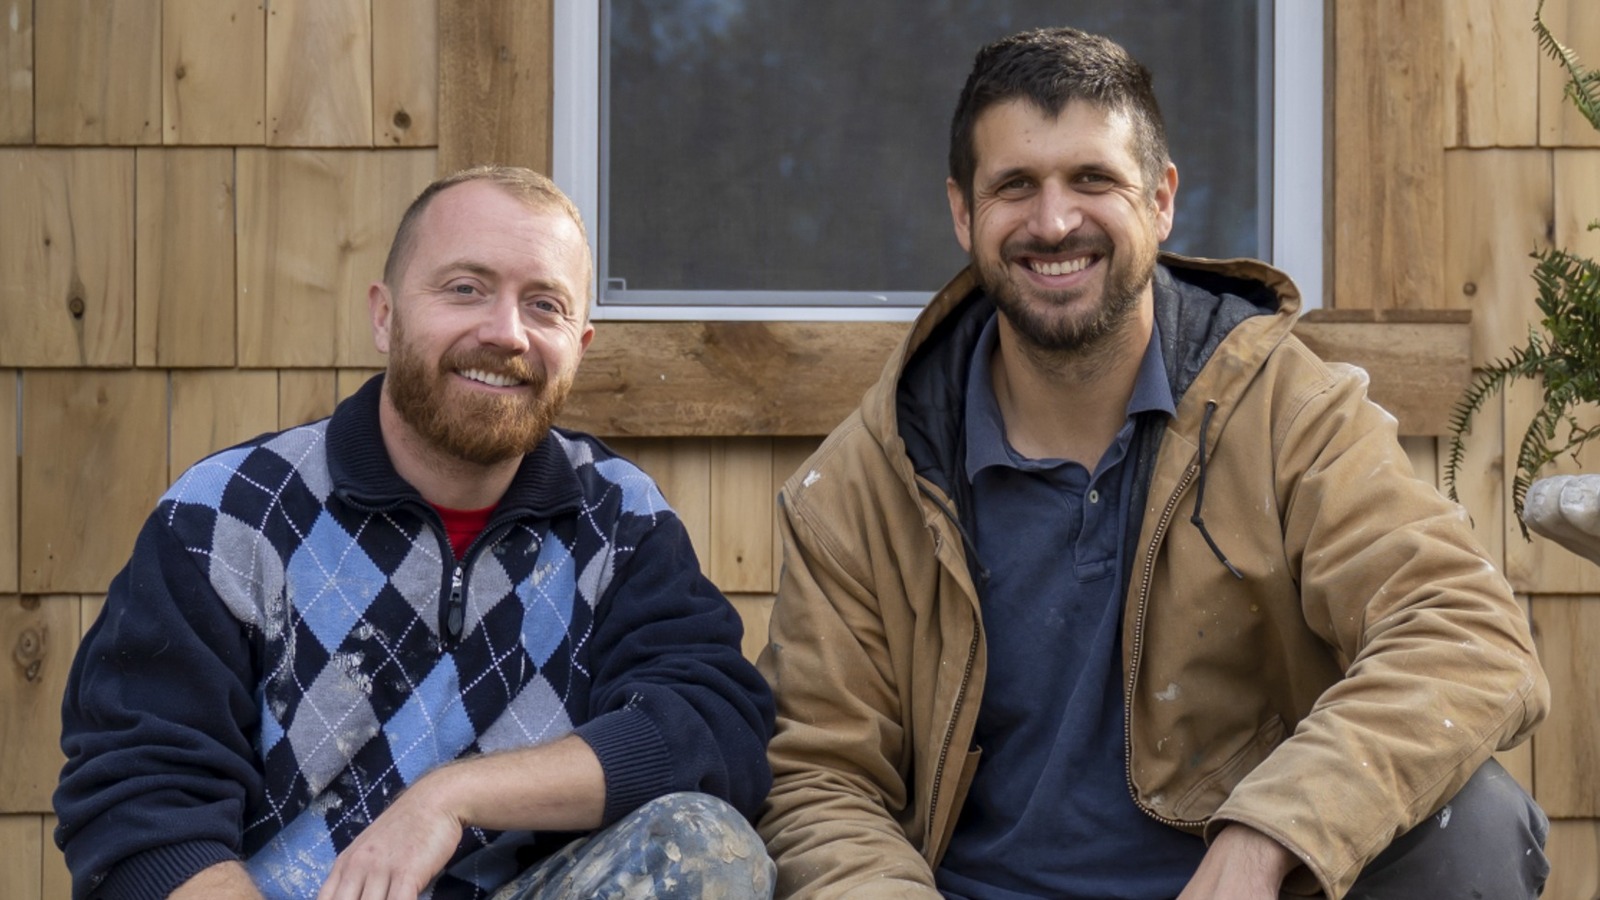 HGTV Fame Prolonged Keith Bynum And Evan Thomas' Engagement - The List